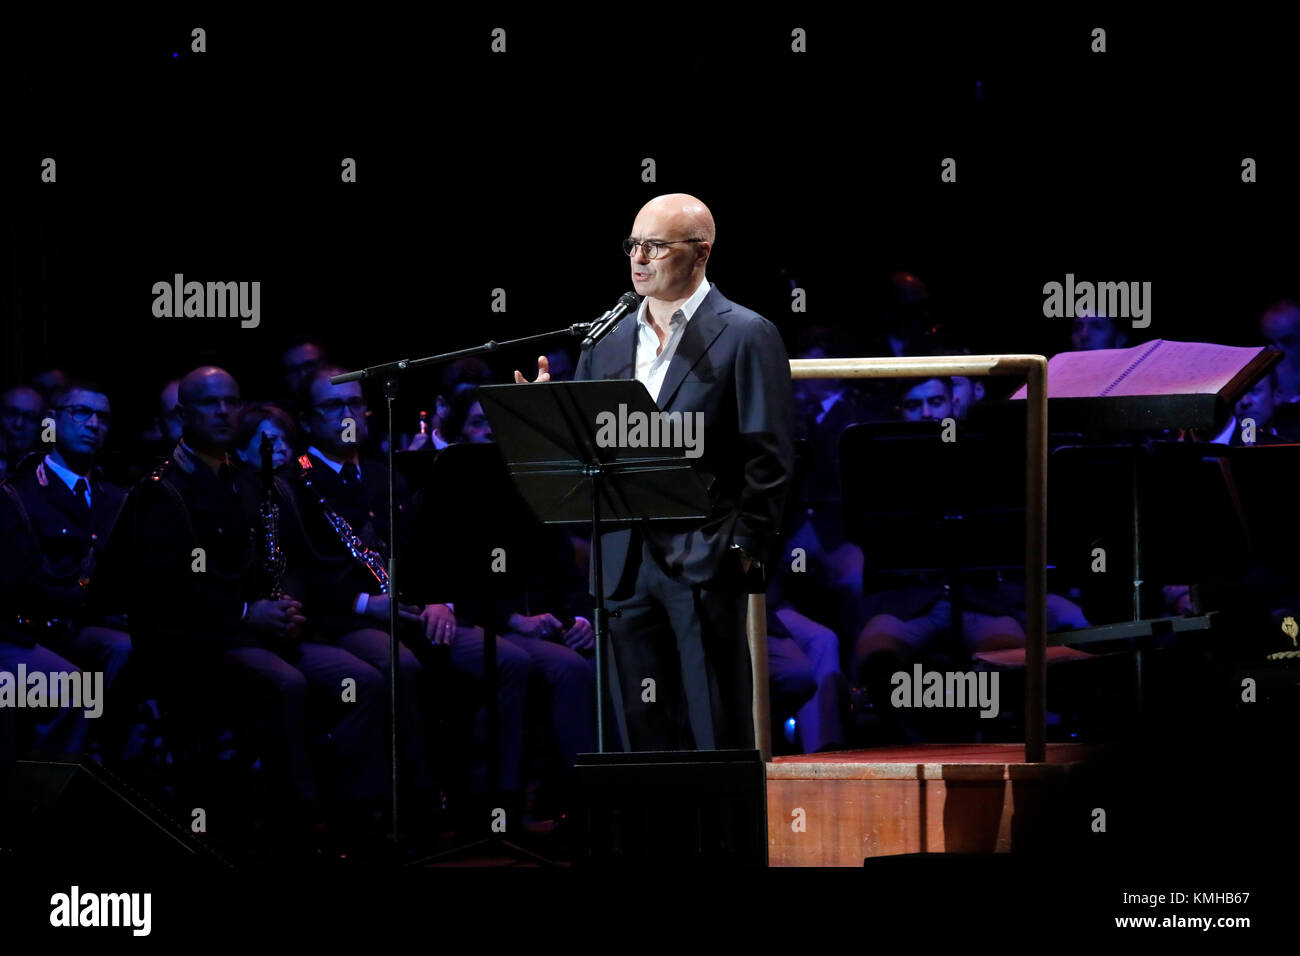 Rome, Italy - 11 December 2017: the actor Luca Zingaretti performs on the stage of the Auditorium Parco della Musica, on the occasion of the concert of the State Police Band, 'Be there always, with music and words'. Stock Photo